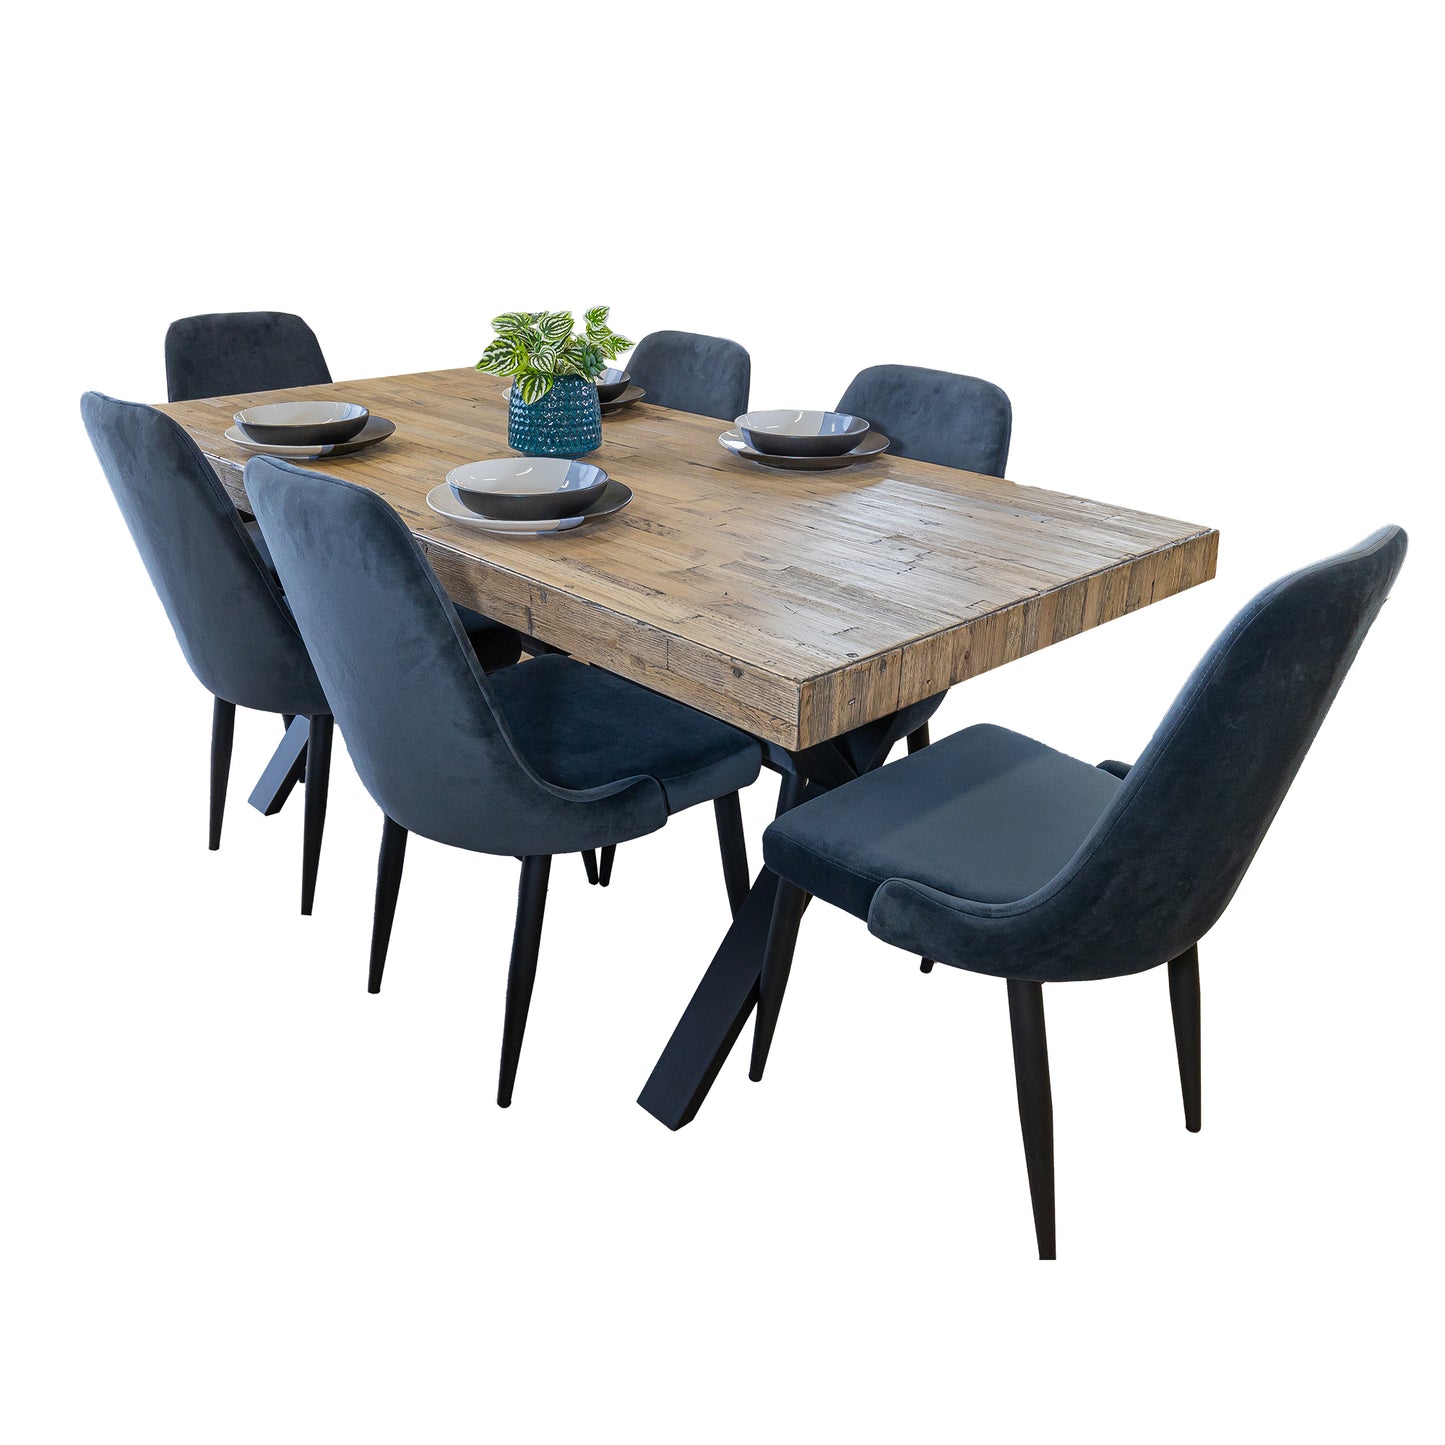 Eva Dining Chair Set of 6 Fabric Seat with Metal Frame - Charcoal